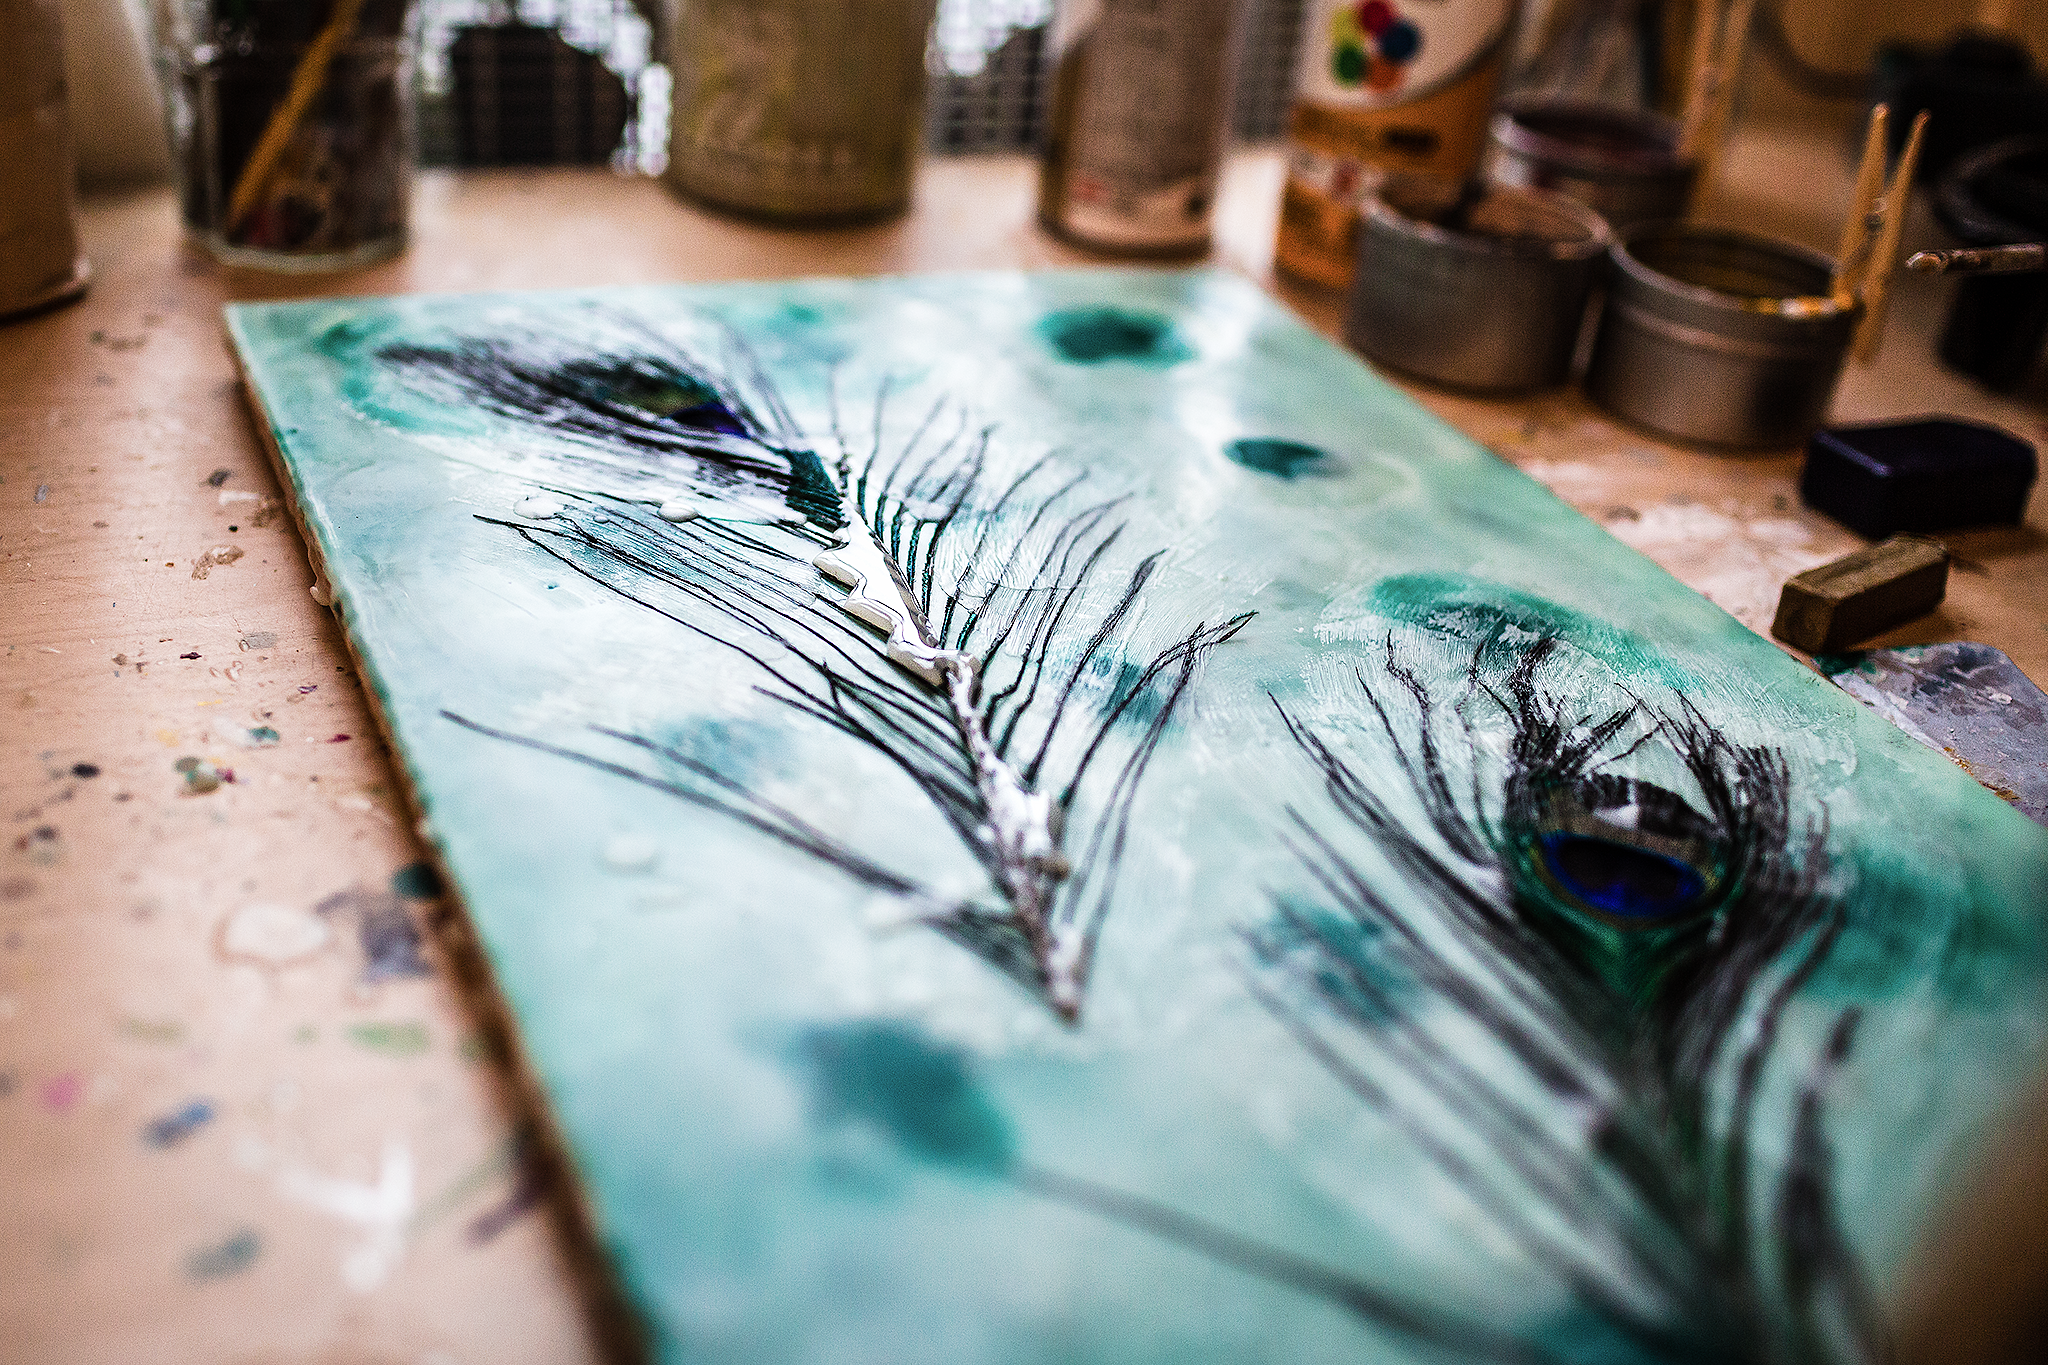 peacock feathers with melted wax on canvas